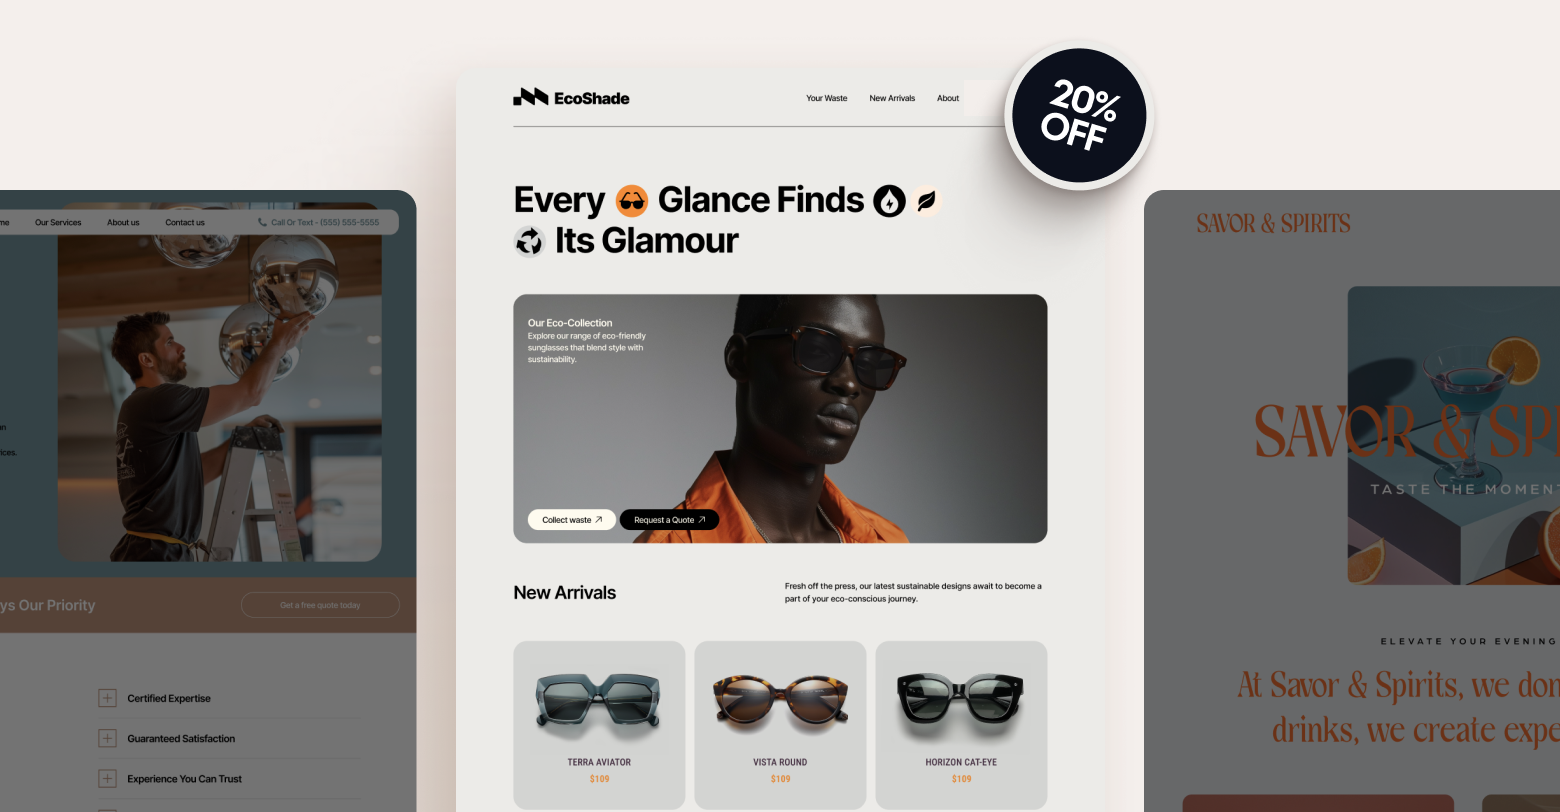 A man wearing sunglasses is featured on a website with a badge of 20% off